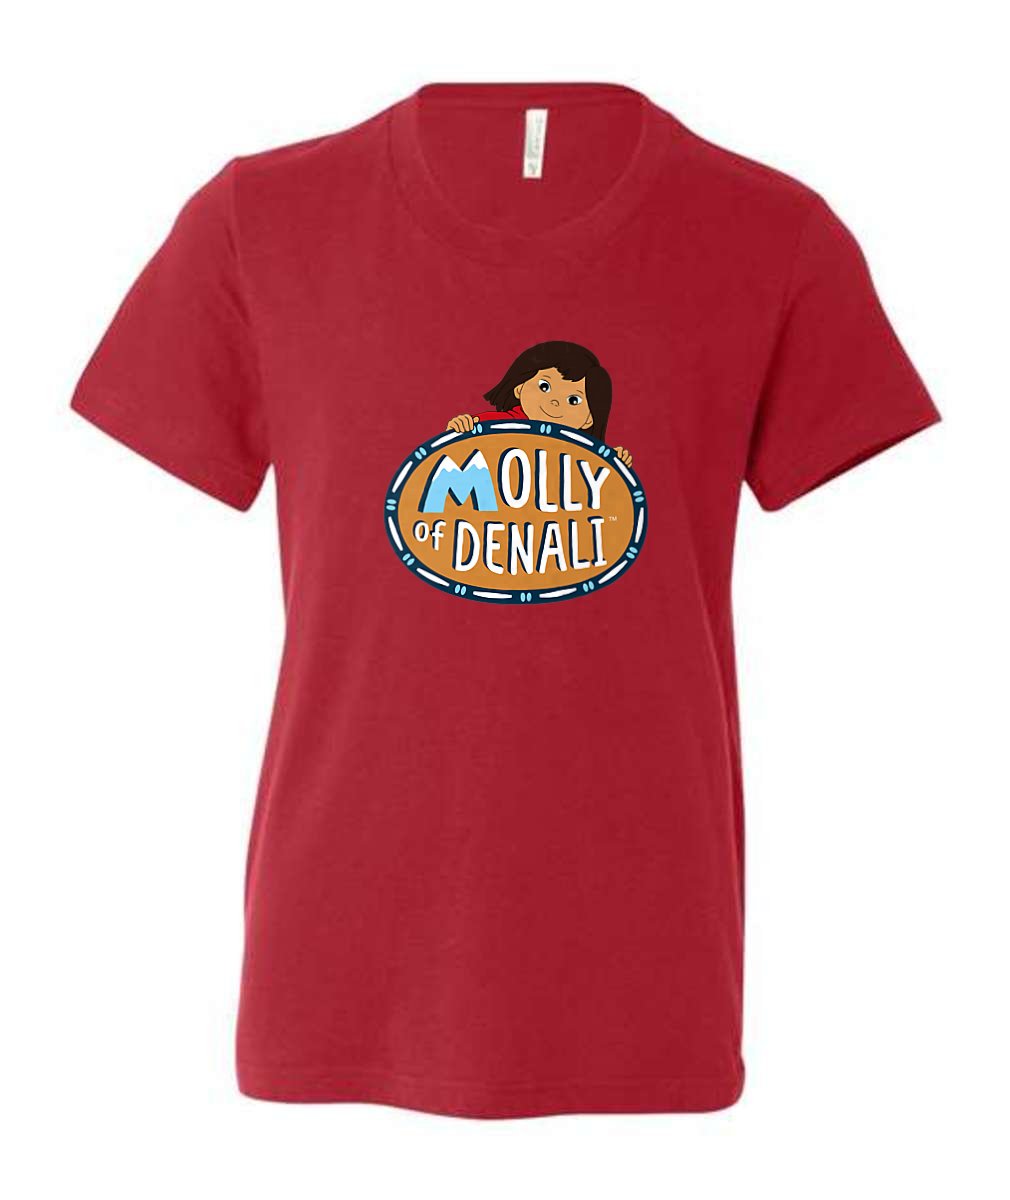 SURPRISE: Our red logo t-shirt is now 20% off through 10/27! Use promo code MODREDT20 🥳 🛍mollyofdenali.shop.pbskids.org/catalog/view/4…